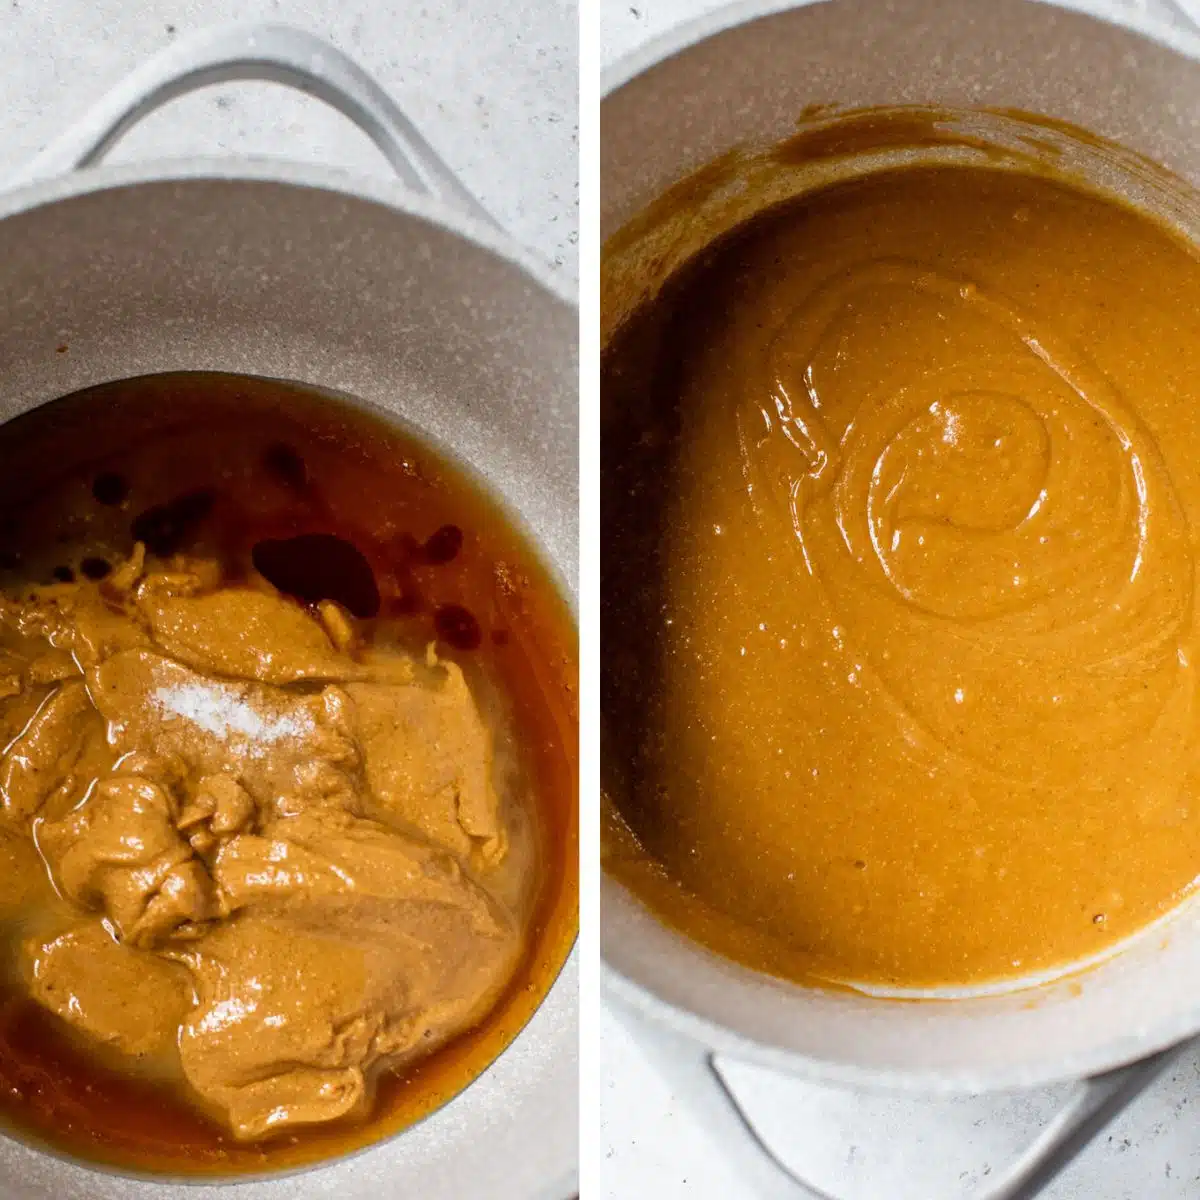 2 images: the left image shows maple syrup and peanut butter in a saucepan and the right image shows the ingredients mixed together